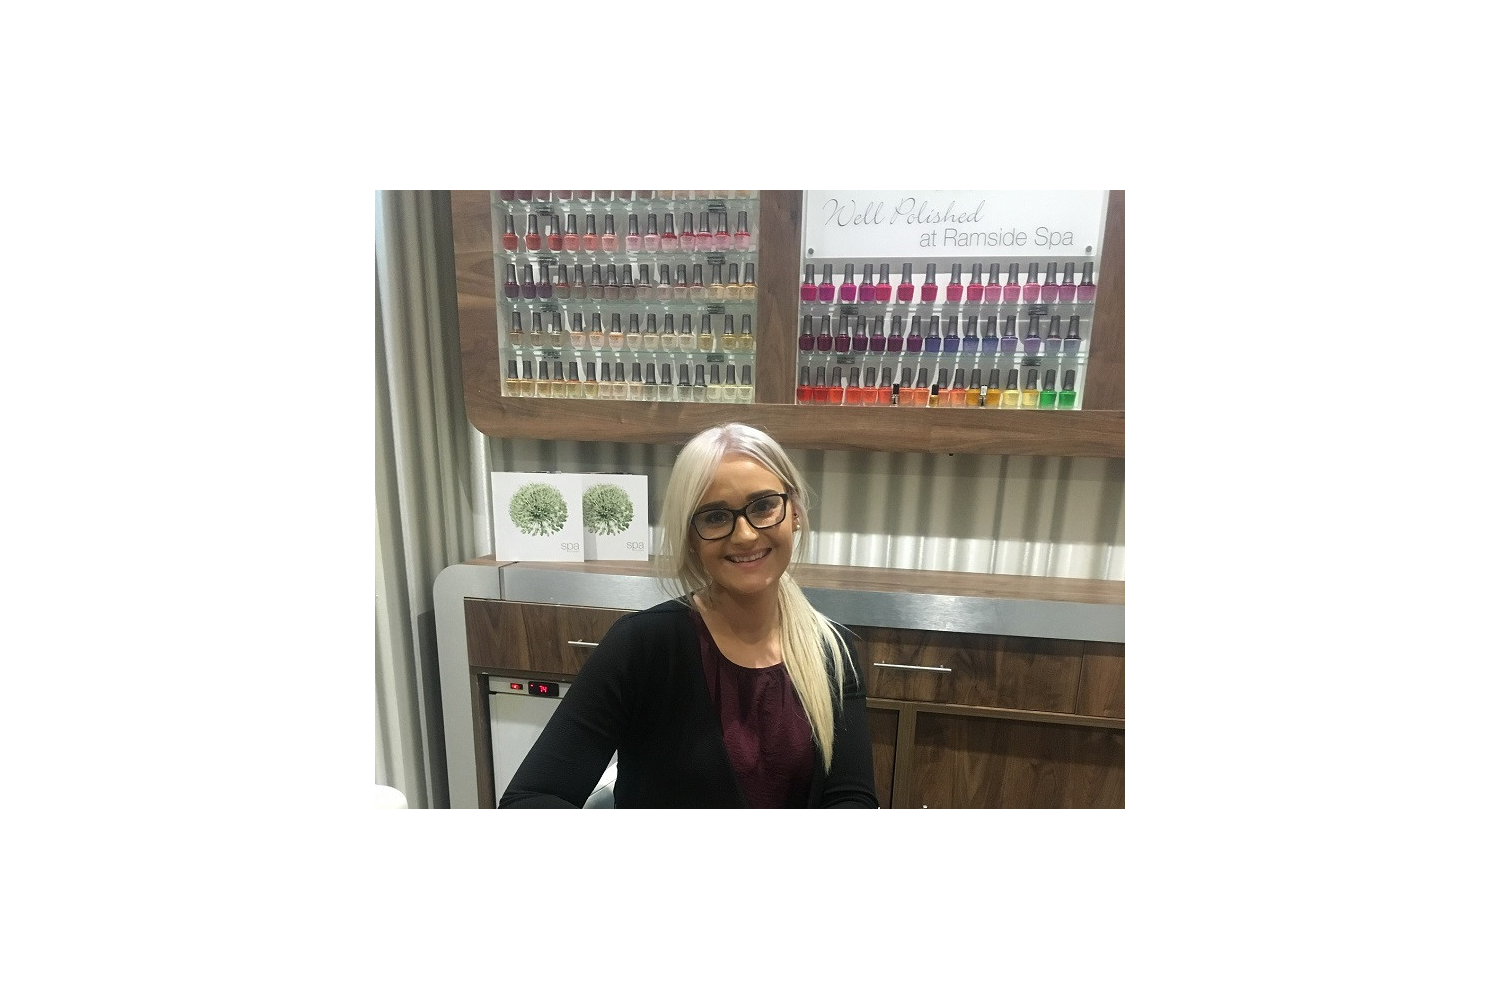 New treatment manager for Ramside Spa